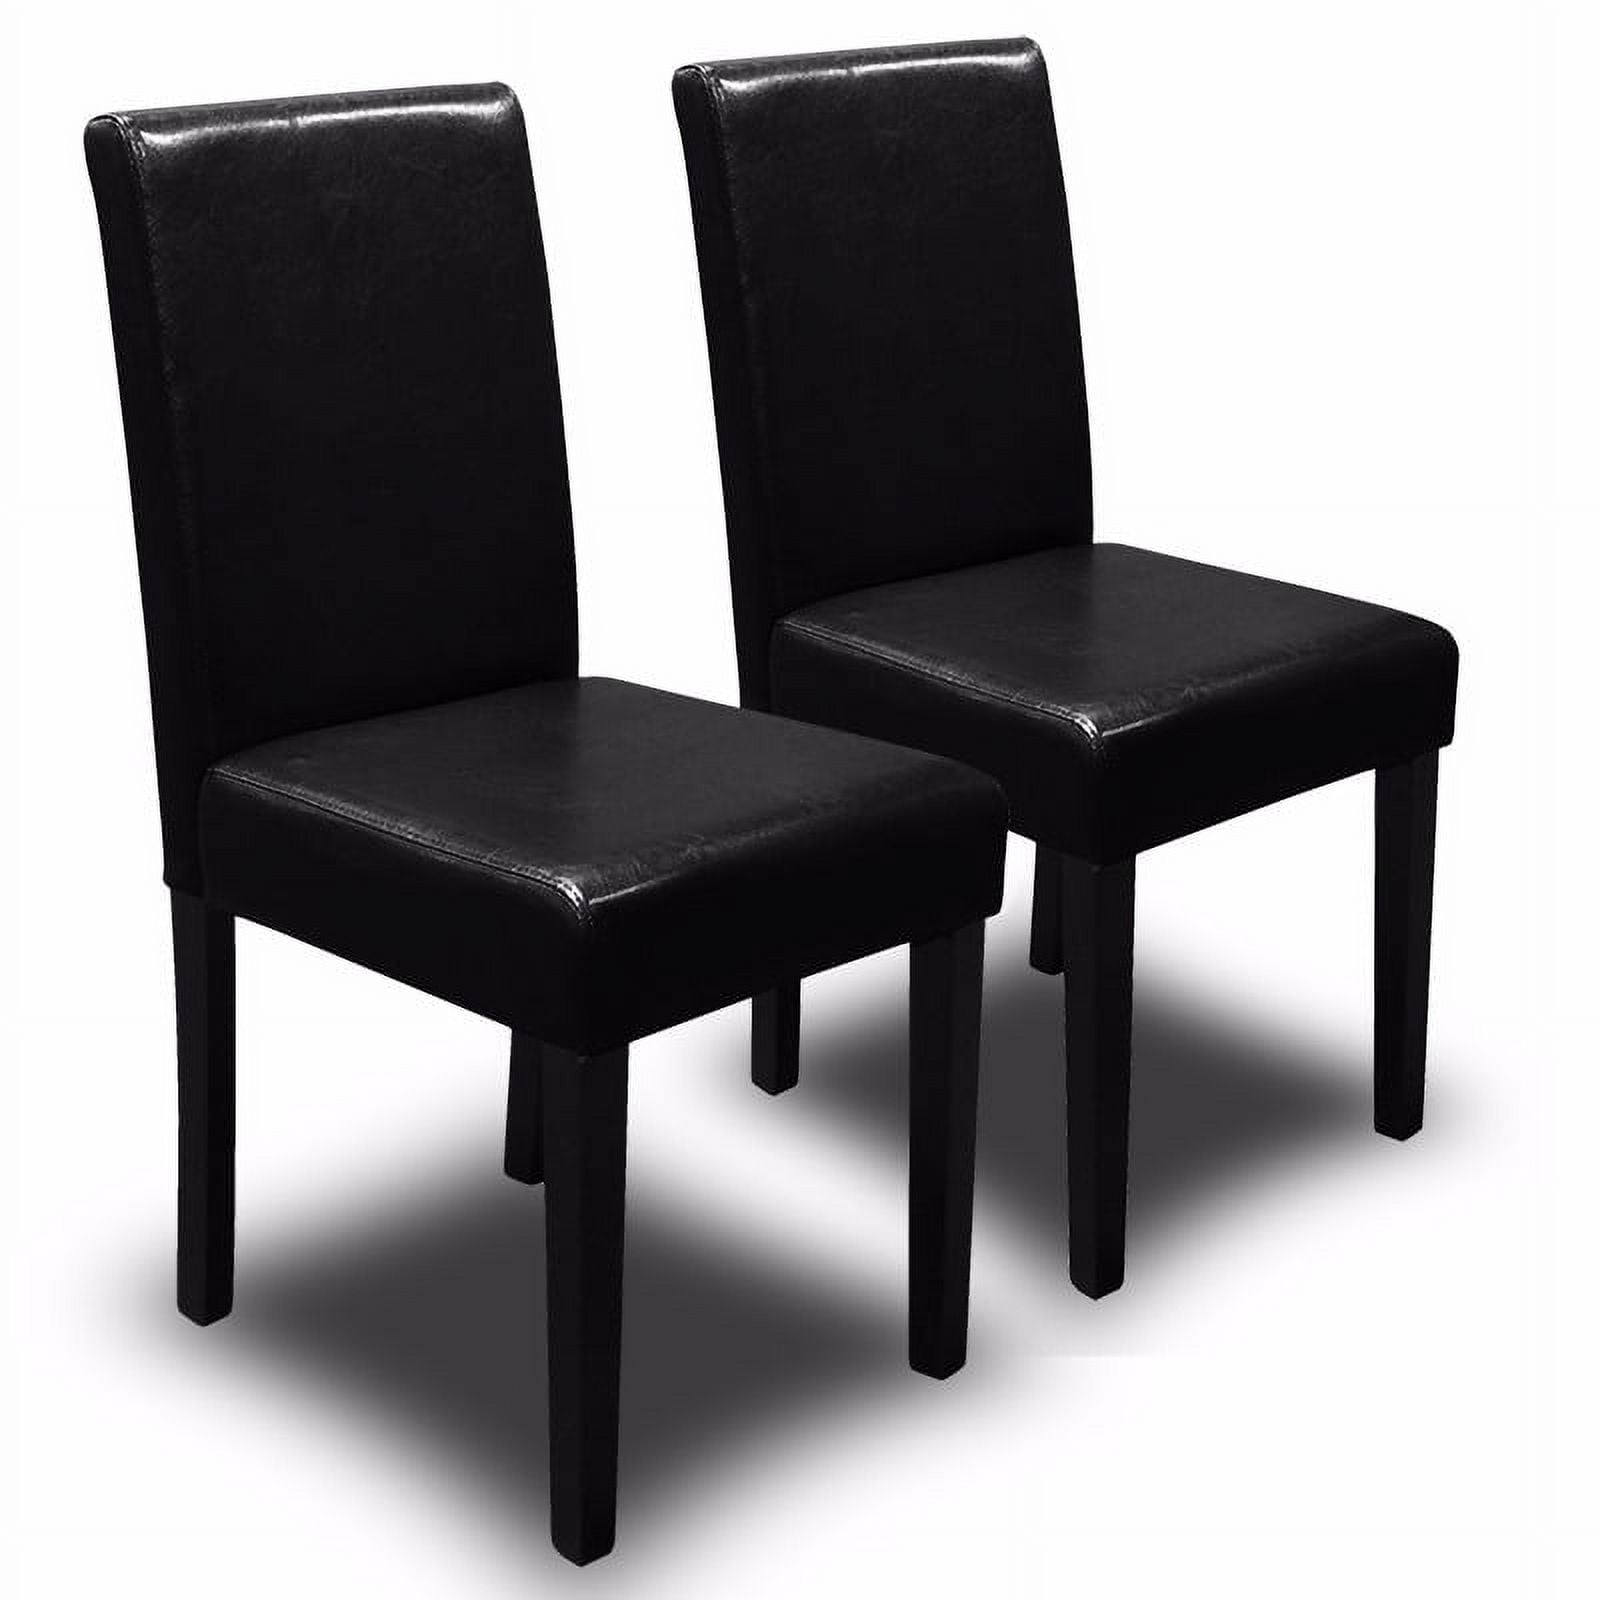 XtremepowerUS 2PC Parson Dining Chair PU Solid Wood Leather Padded ...